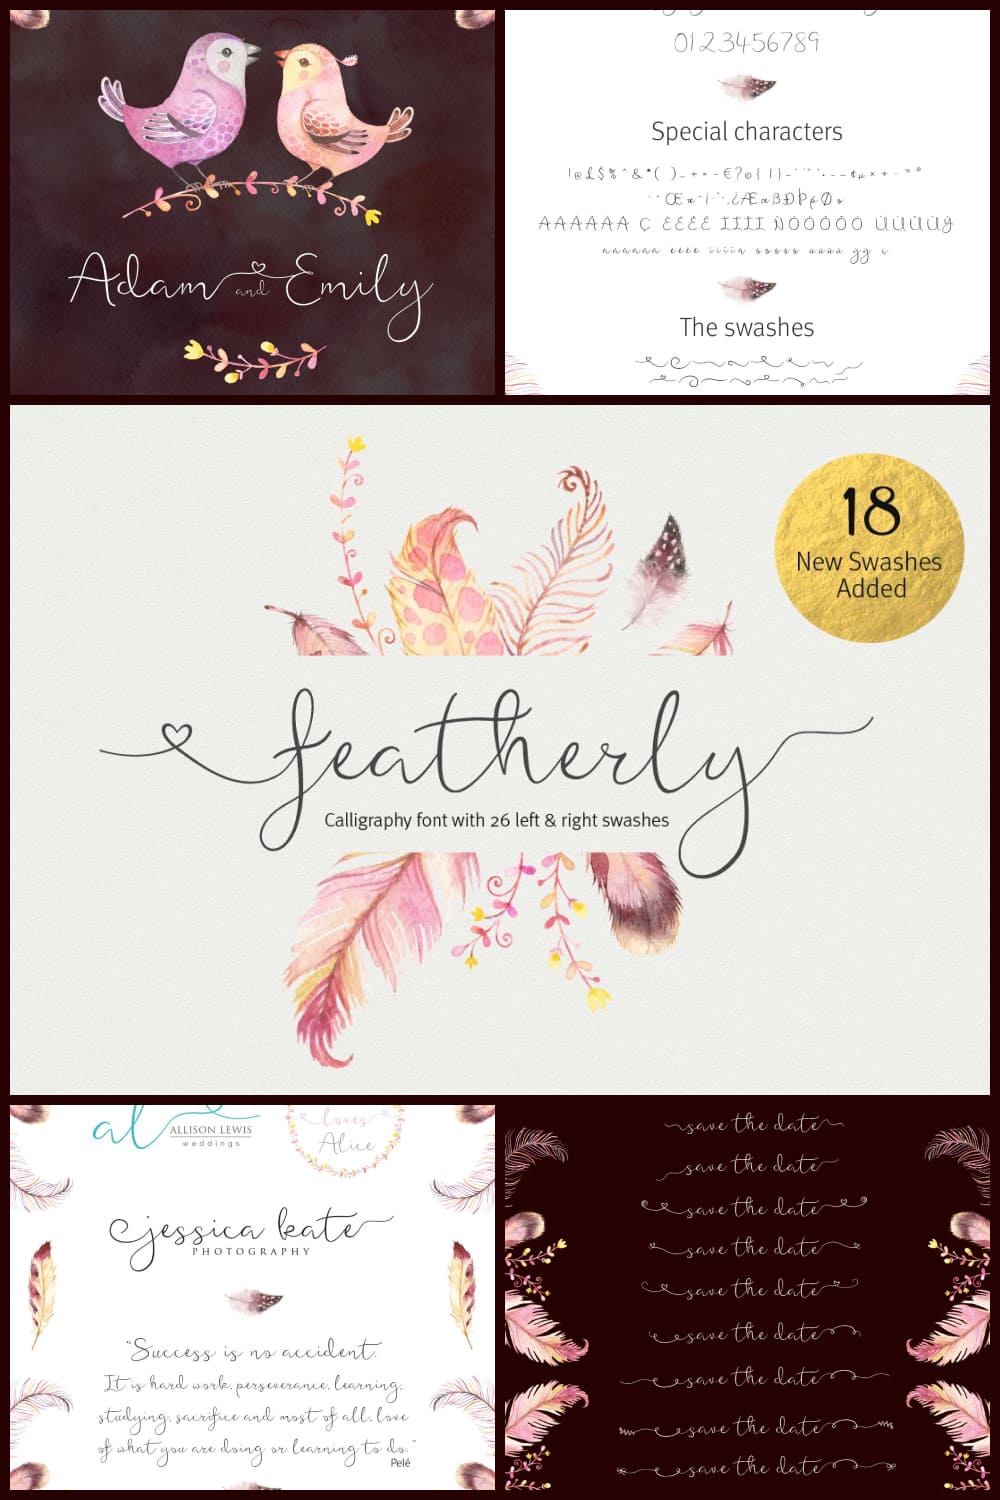 Images of wedding font in different color variations.